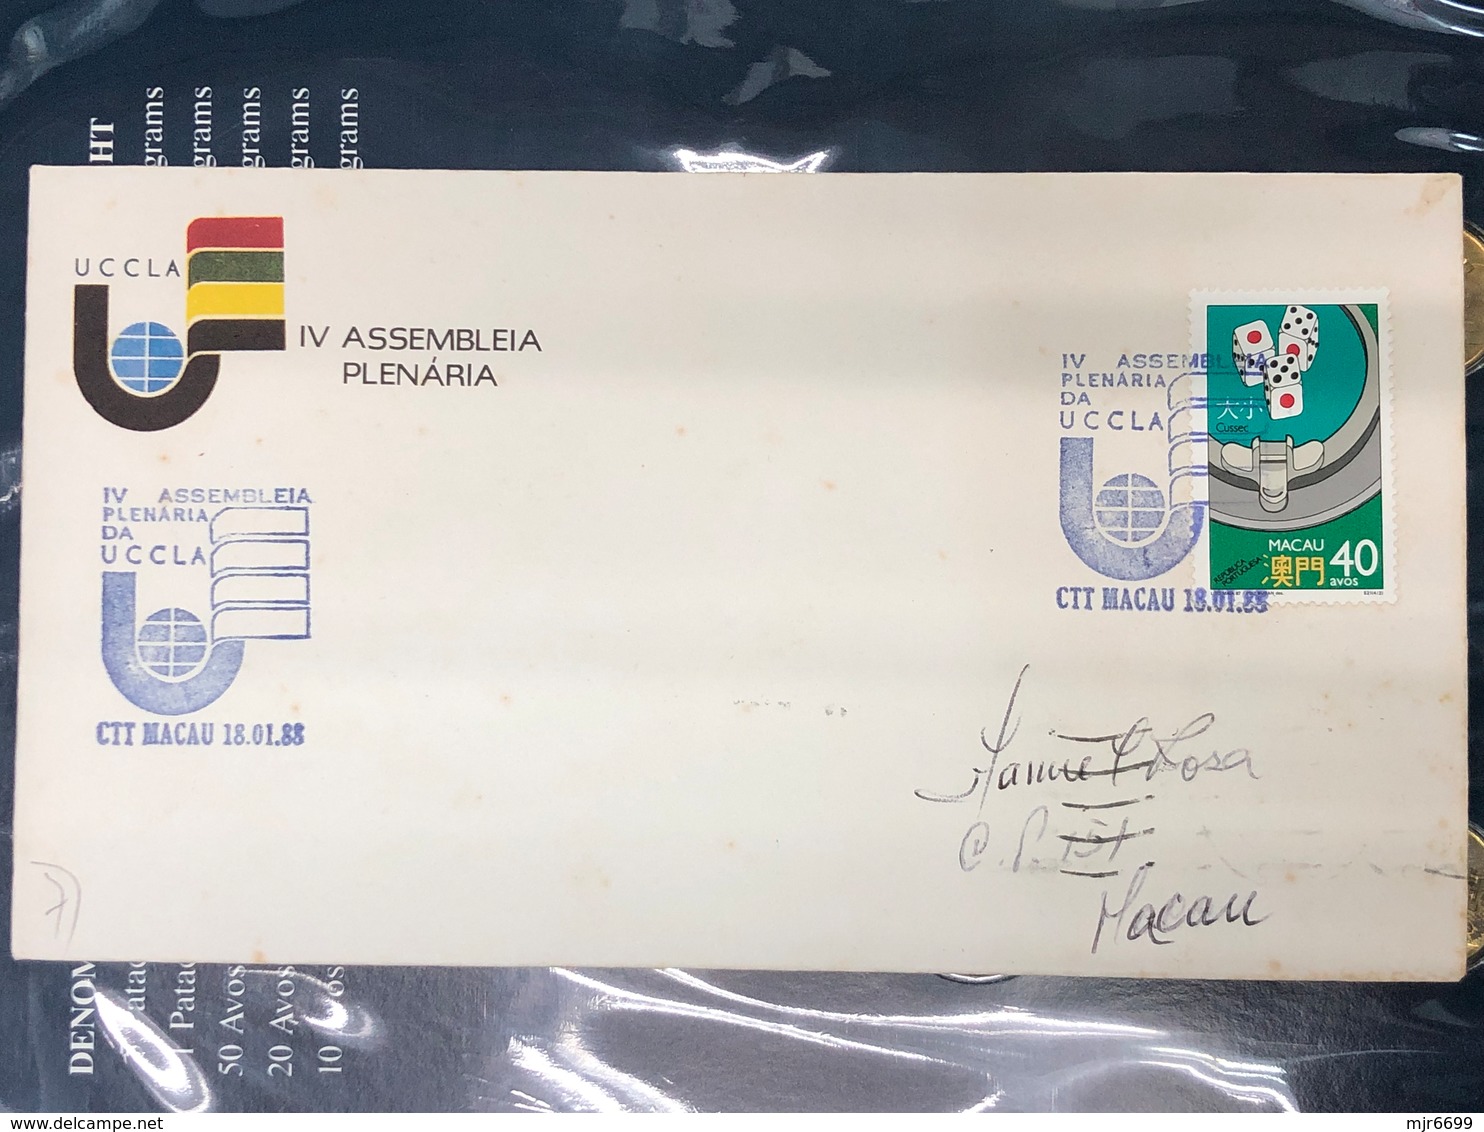 1988 COMMEMORATIVE COVER  LOCALLY USED WITH A WRONG DESIGN STAMP OF THE GAMBLING DICES - FDC